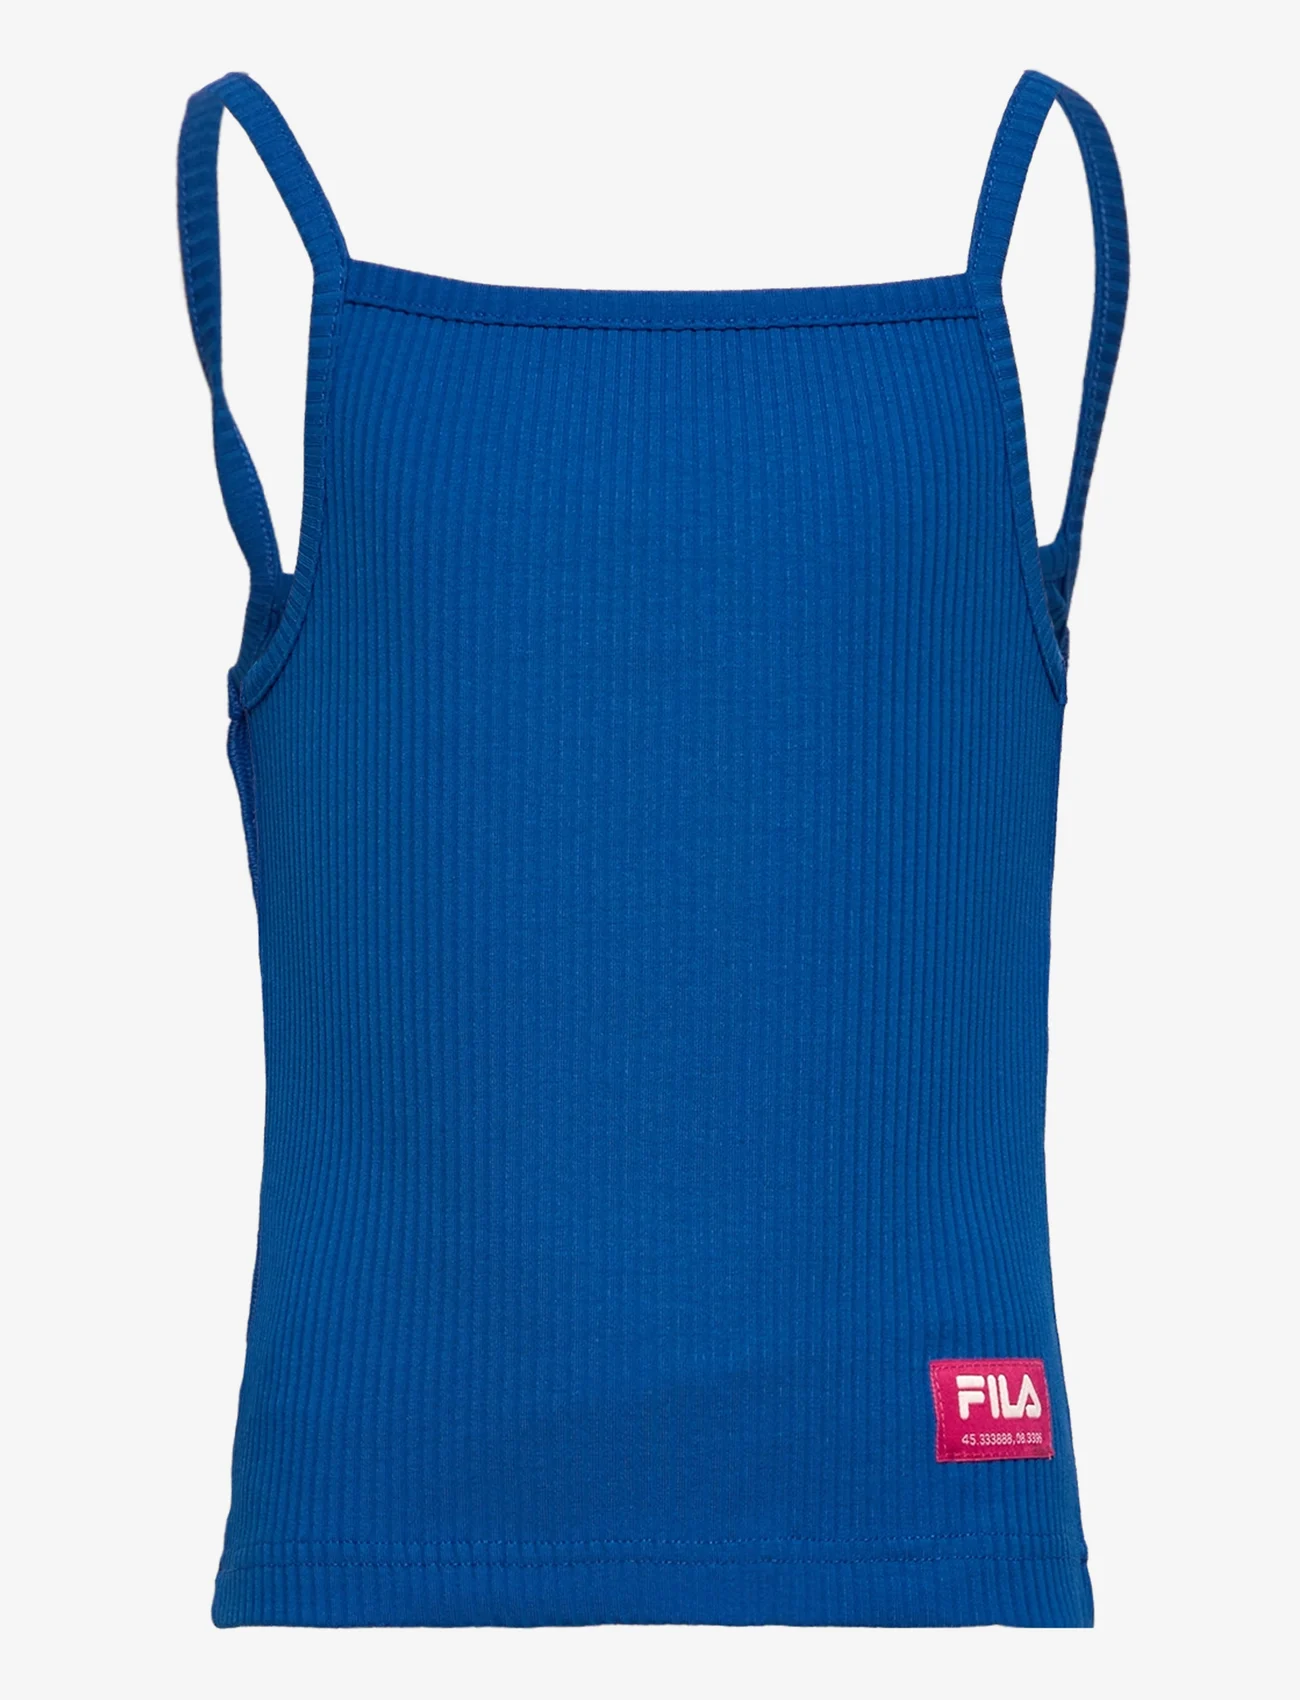 FILA - TARMSTEDT thight top - topit - lapis blue - 0